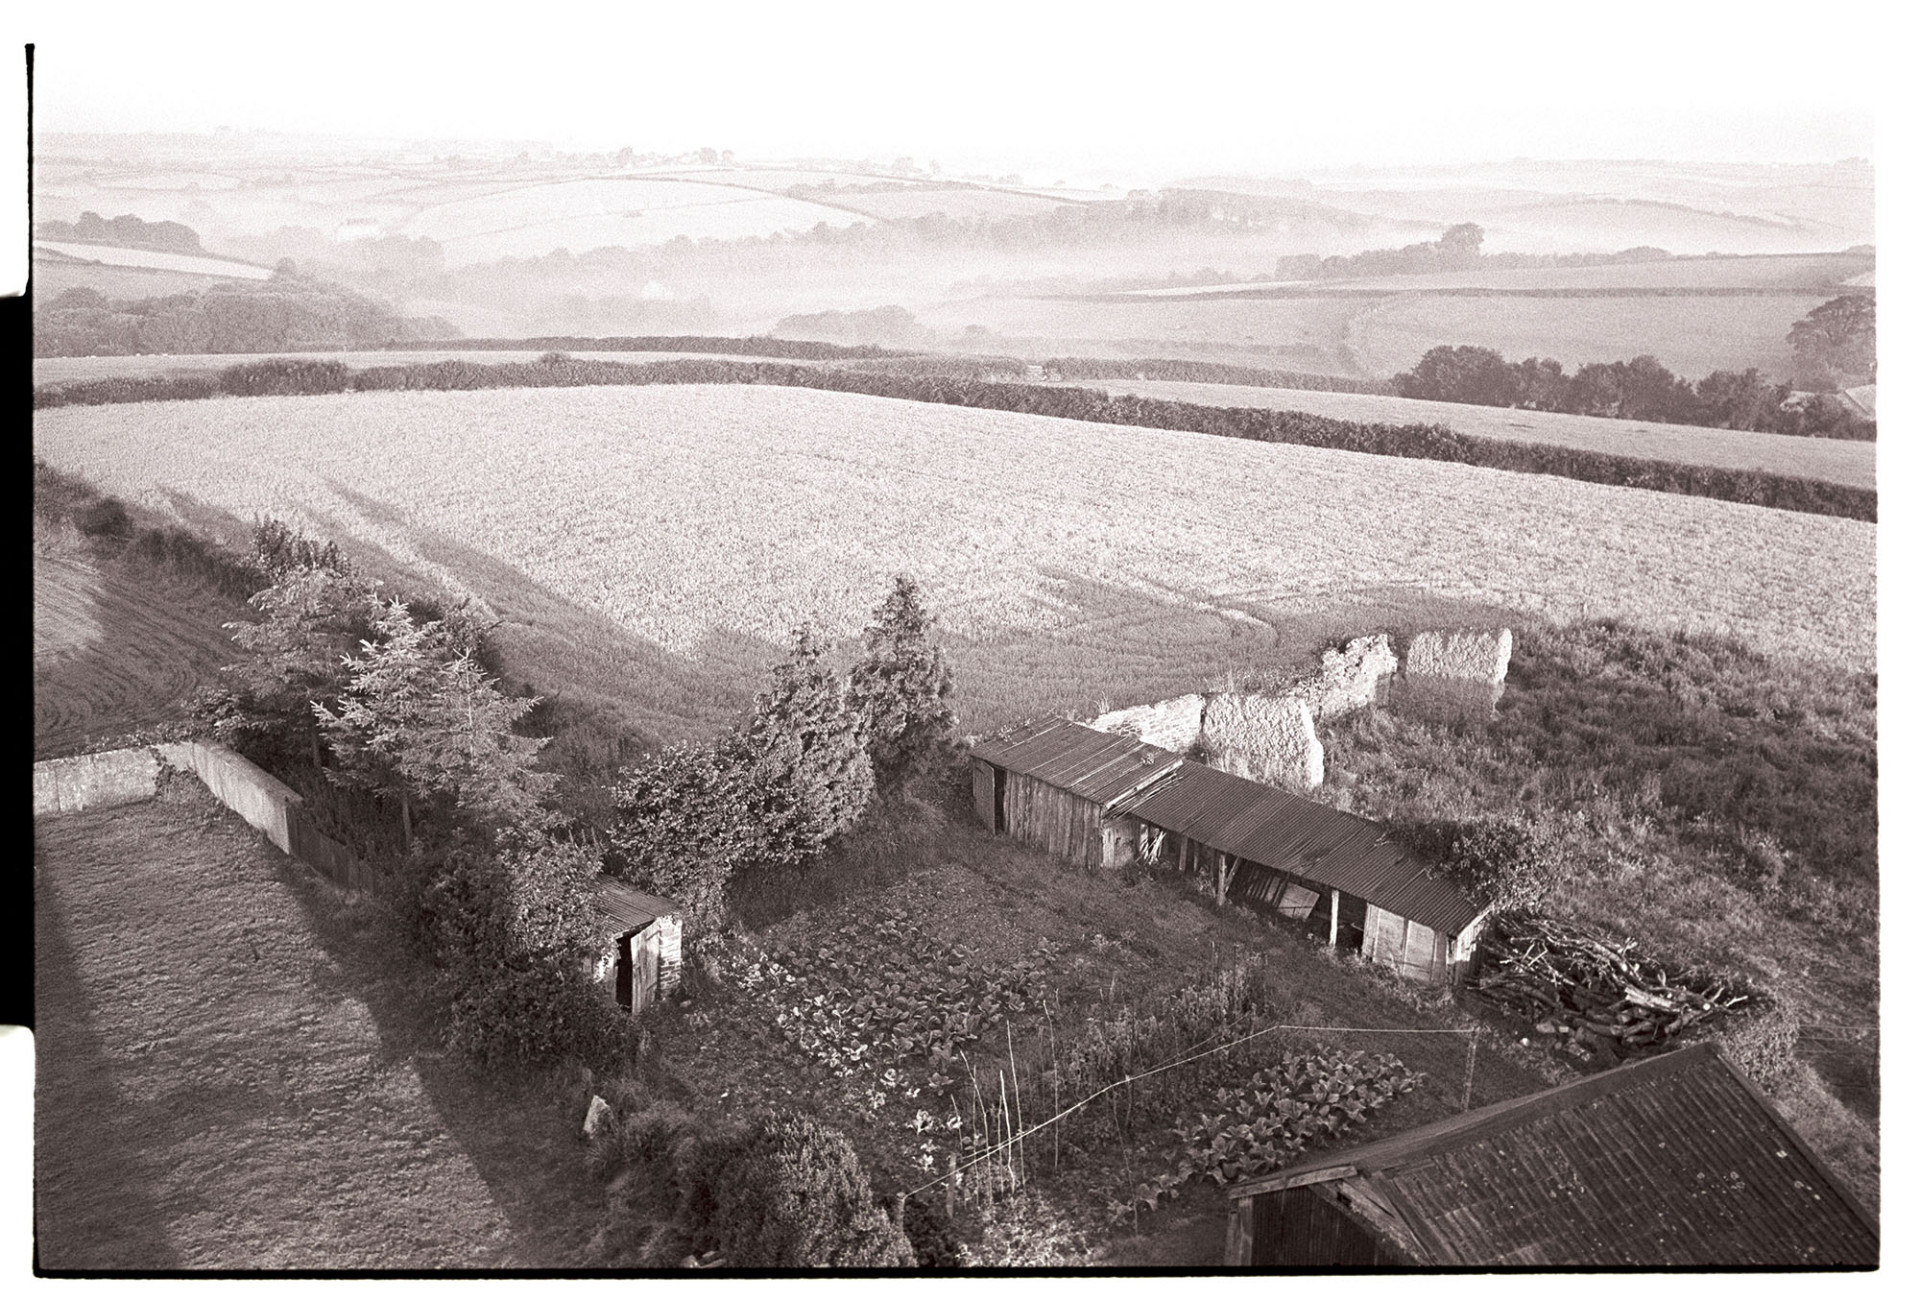 View from top of church tower, early morning, corn fields and vegetable gardens, sheds, huts. 
[A view from Ashreigney Church tower in the early morning. Misty fields, a crop of corn, hedgerows, vegetable gardens and sheds are all visible.]